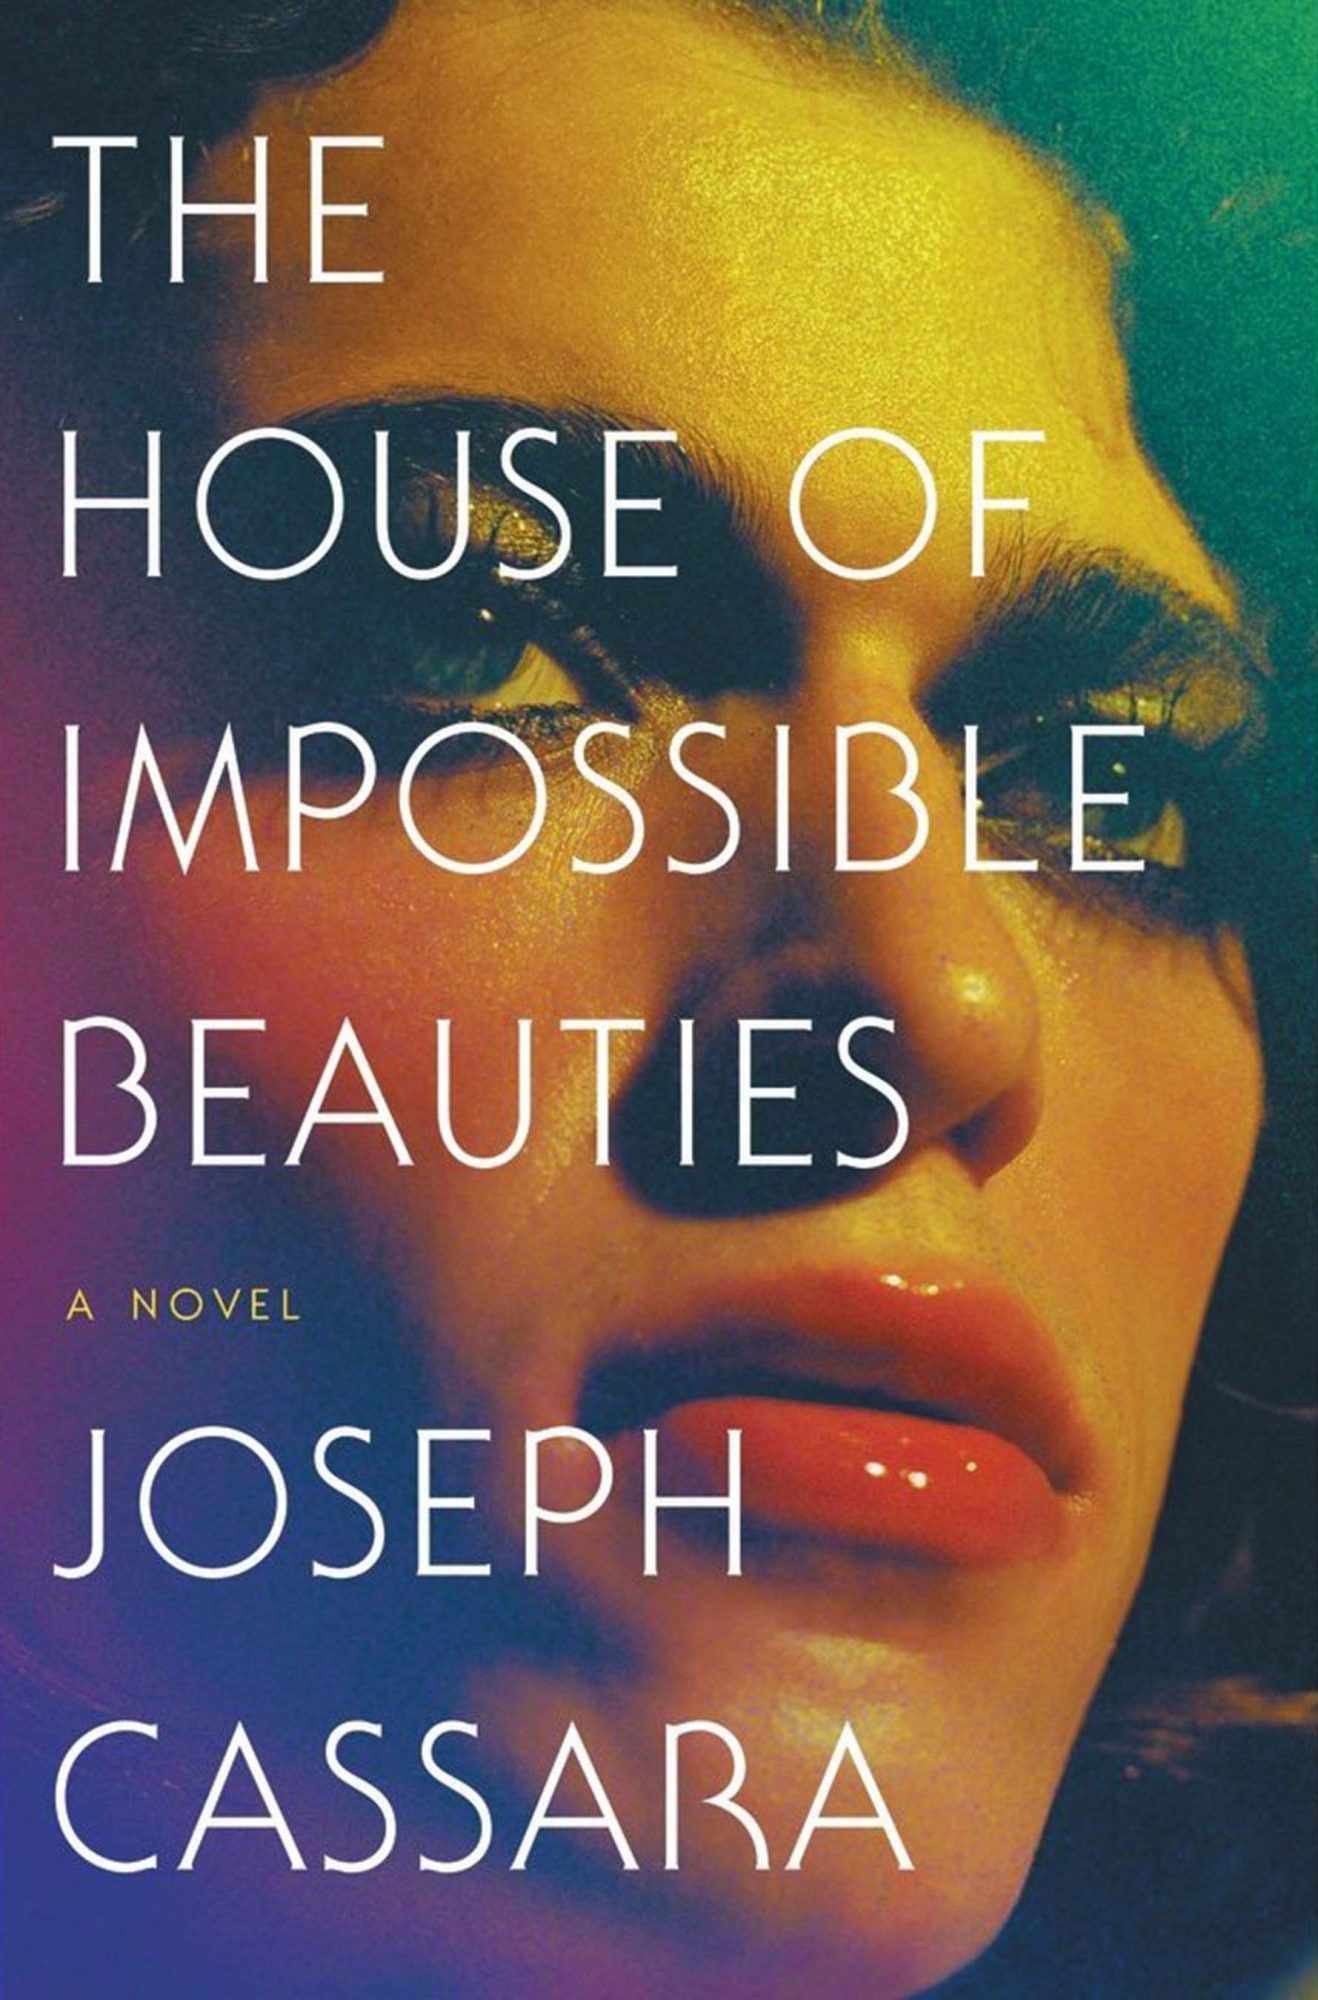 The House of Impossible Beauties, by Joseph Cassara